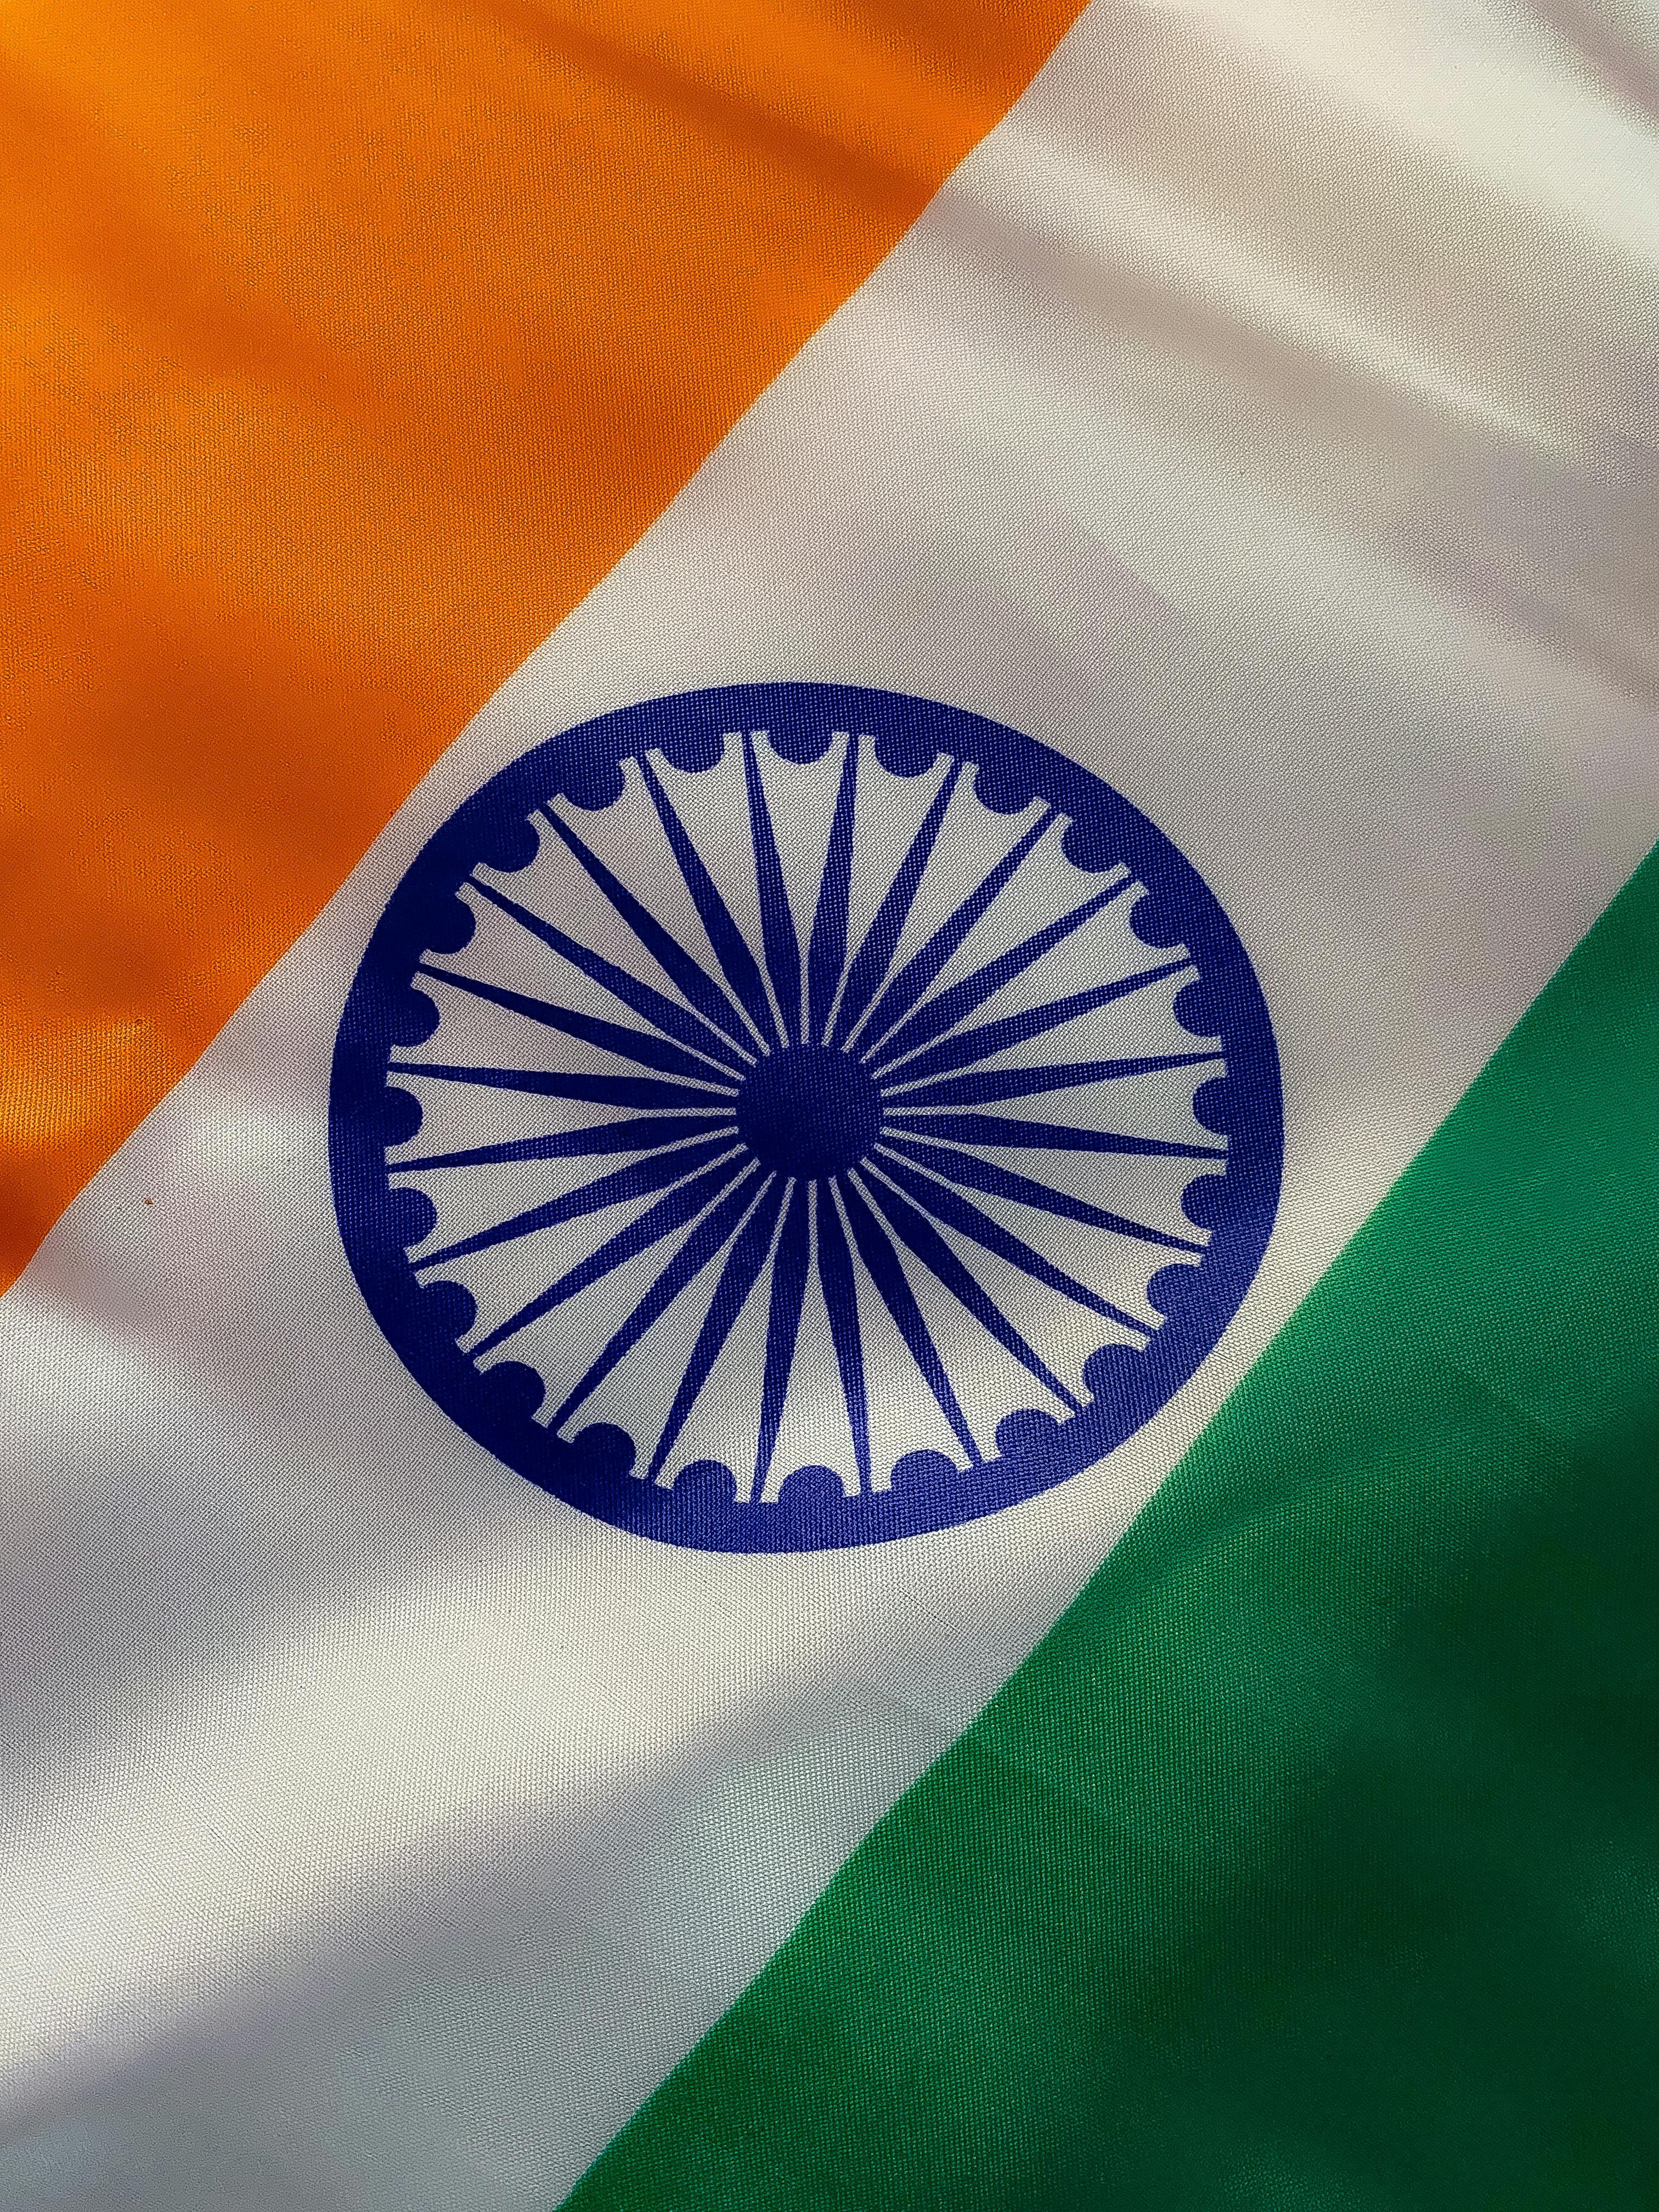 Close-up Photo of an Indian Flag · Free Stock Photo